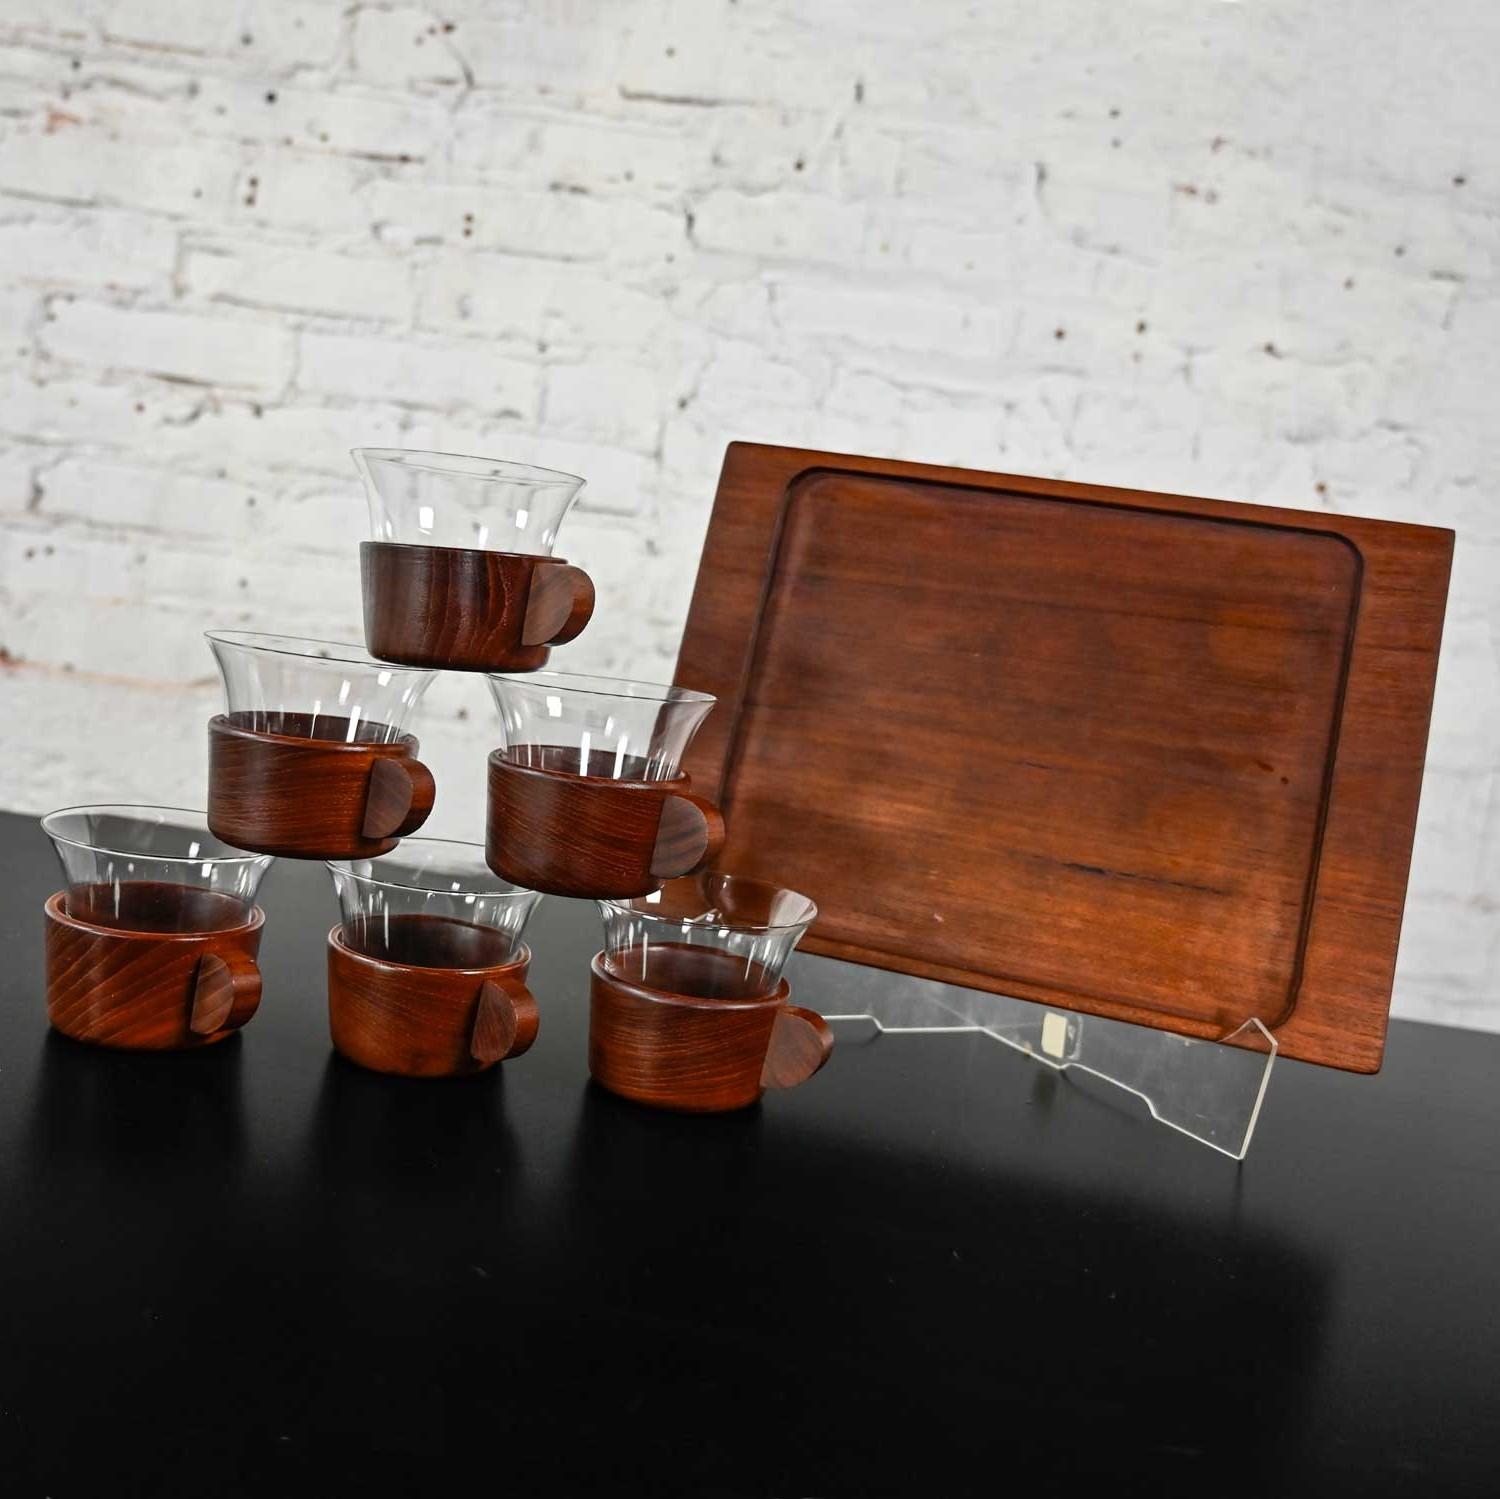 Wonderful vintage Mid-Century Modern Galatix hand-made Burma teak tea service set of 6 glass inserts, 6 Burma teak cup vessels, and a Burma teak serving tray. Beautiful condition, keeping in mind that this is vintage and not new so will have signs